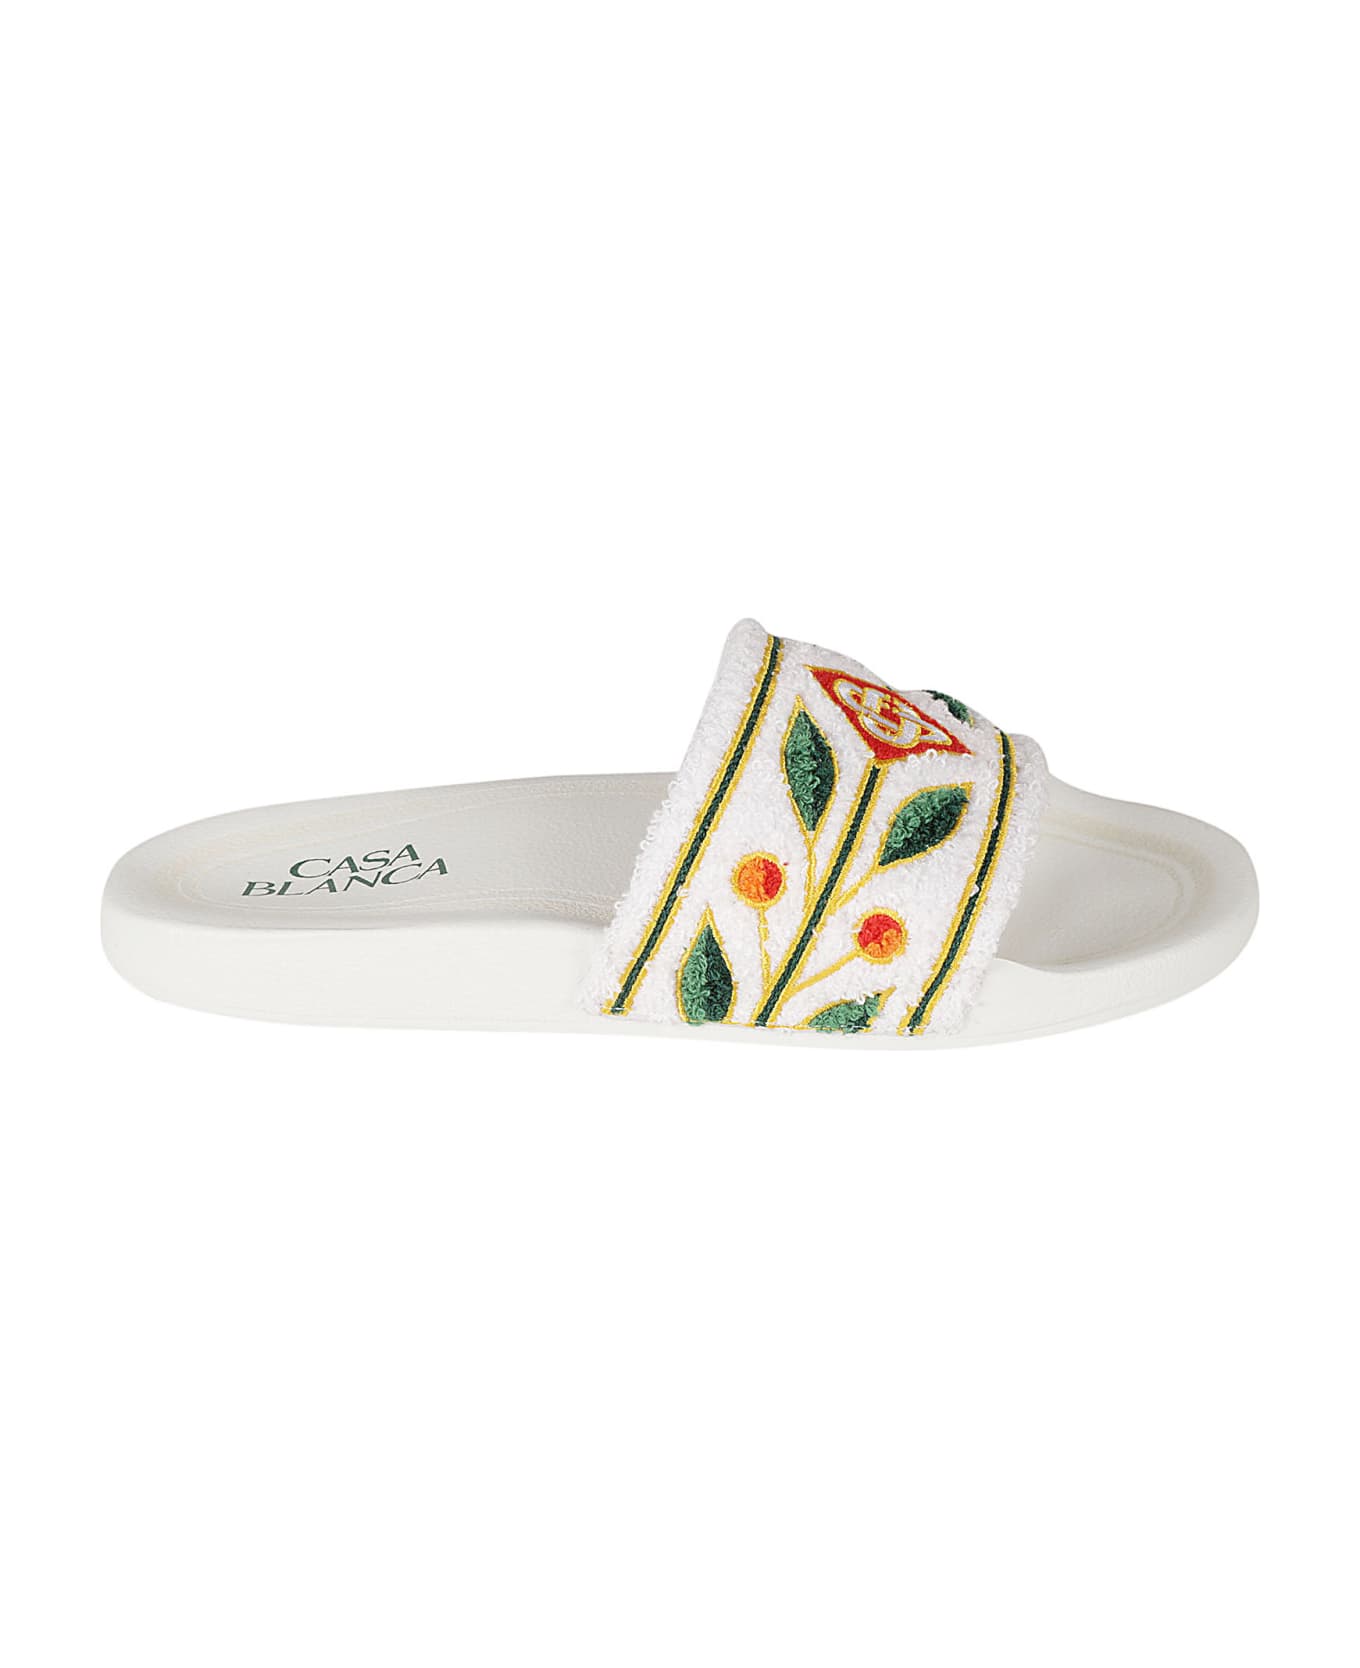 Casablanca Embroidered Terry Sliders - White その他各種シューズ